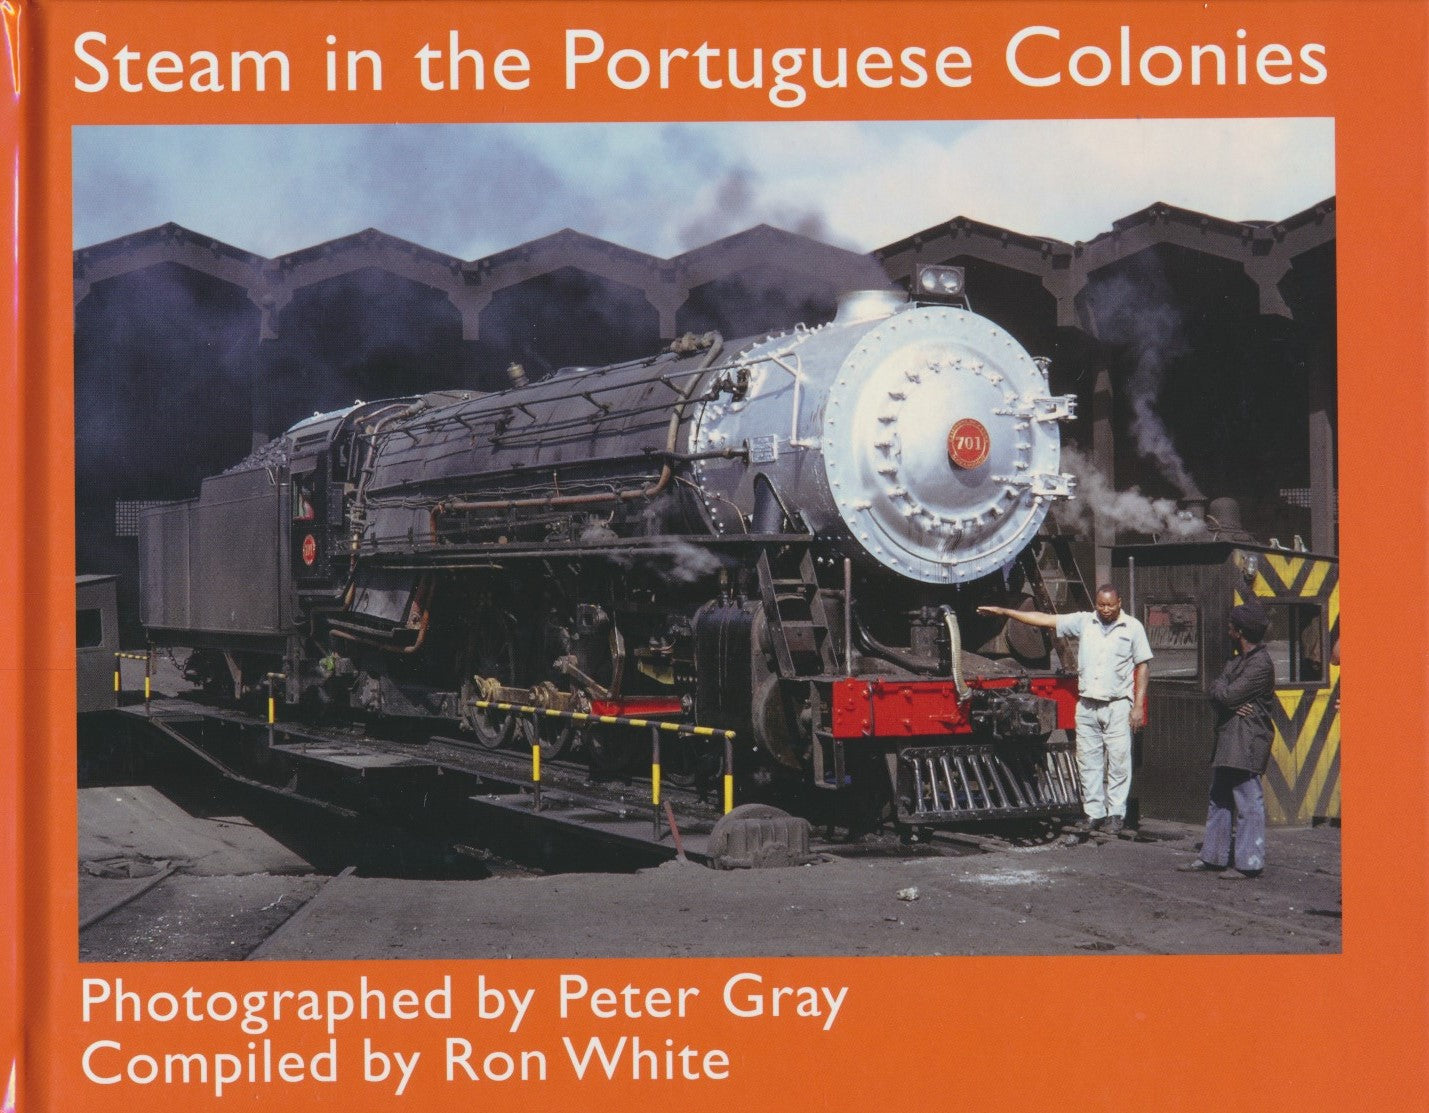 Steam in the Portuguese Colonies